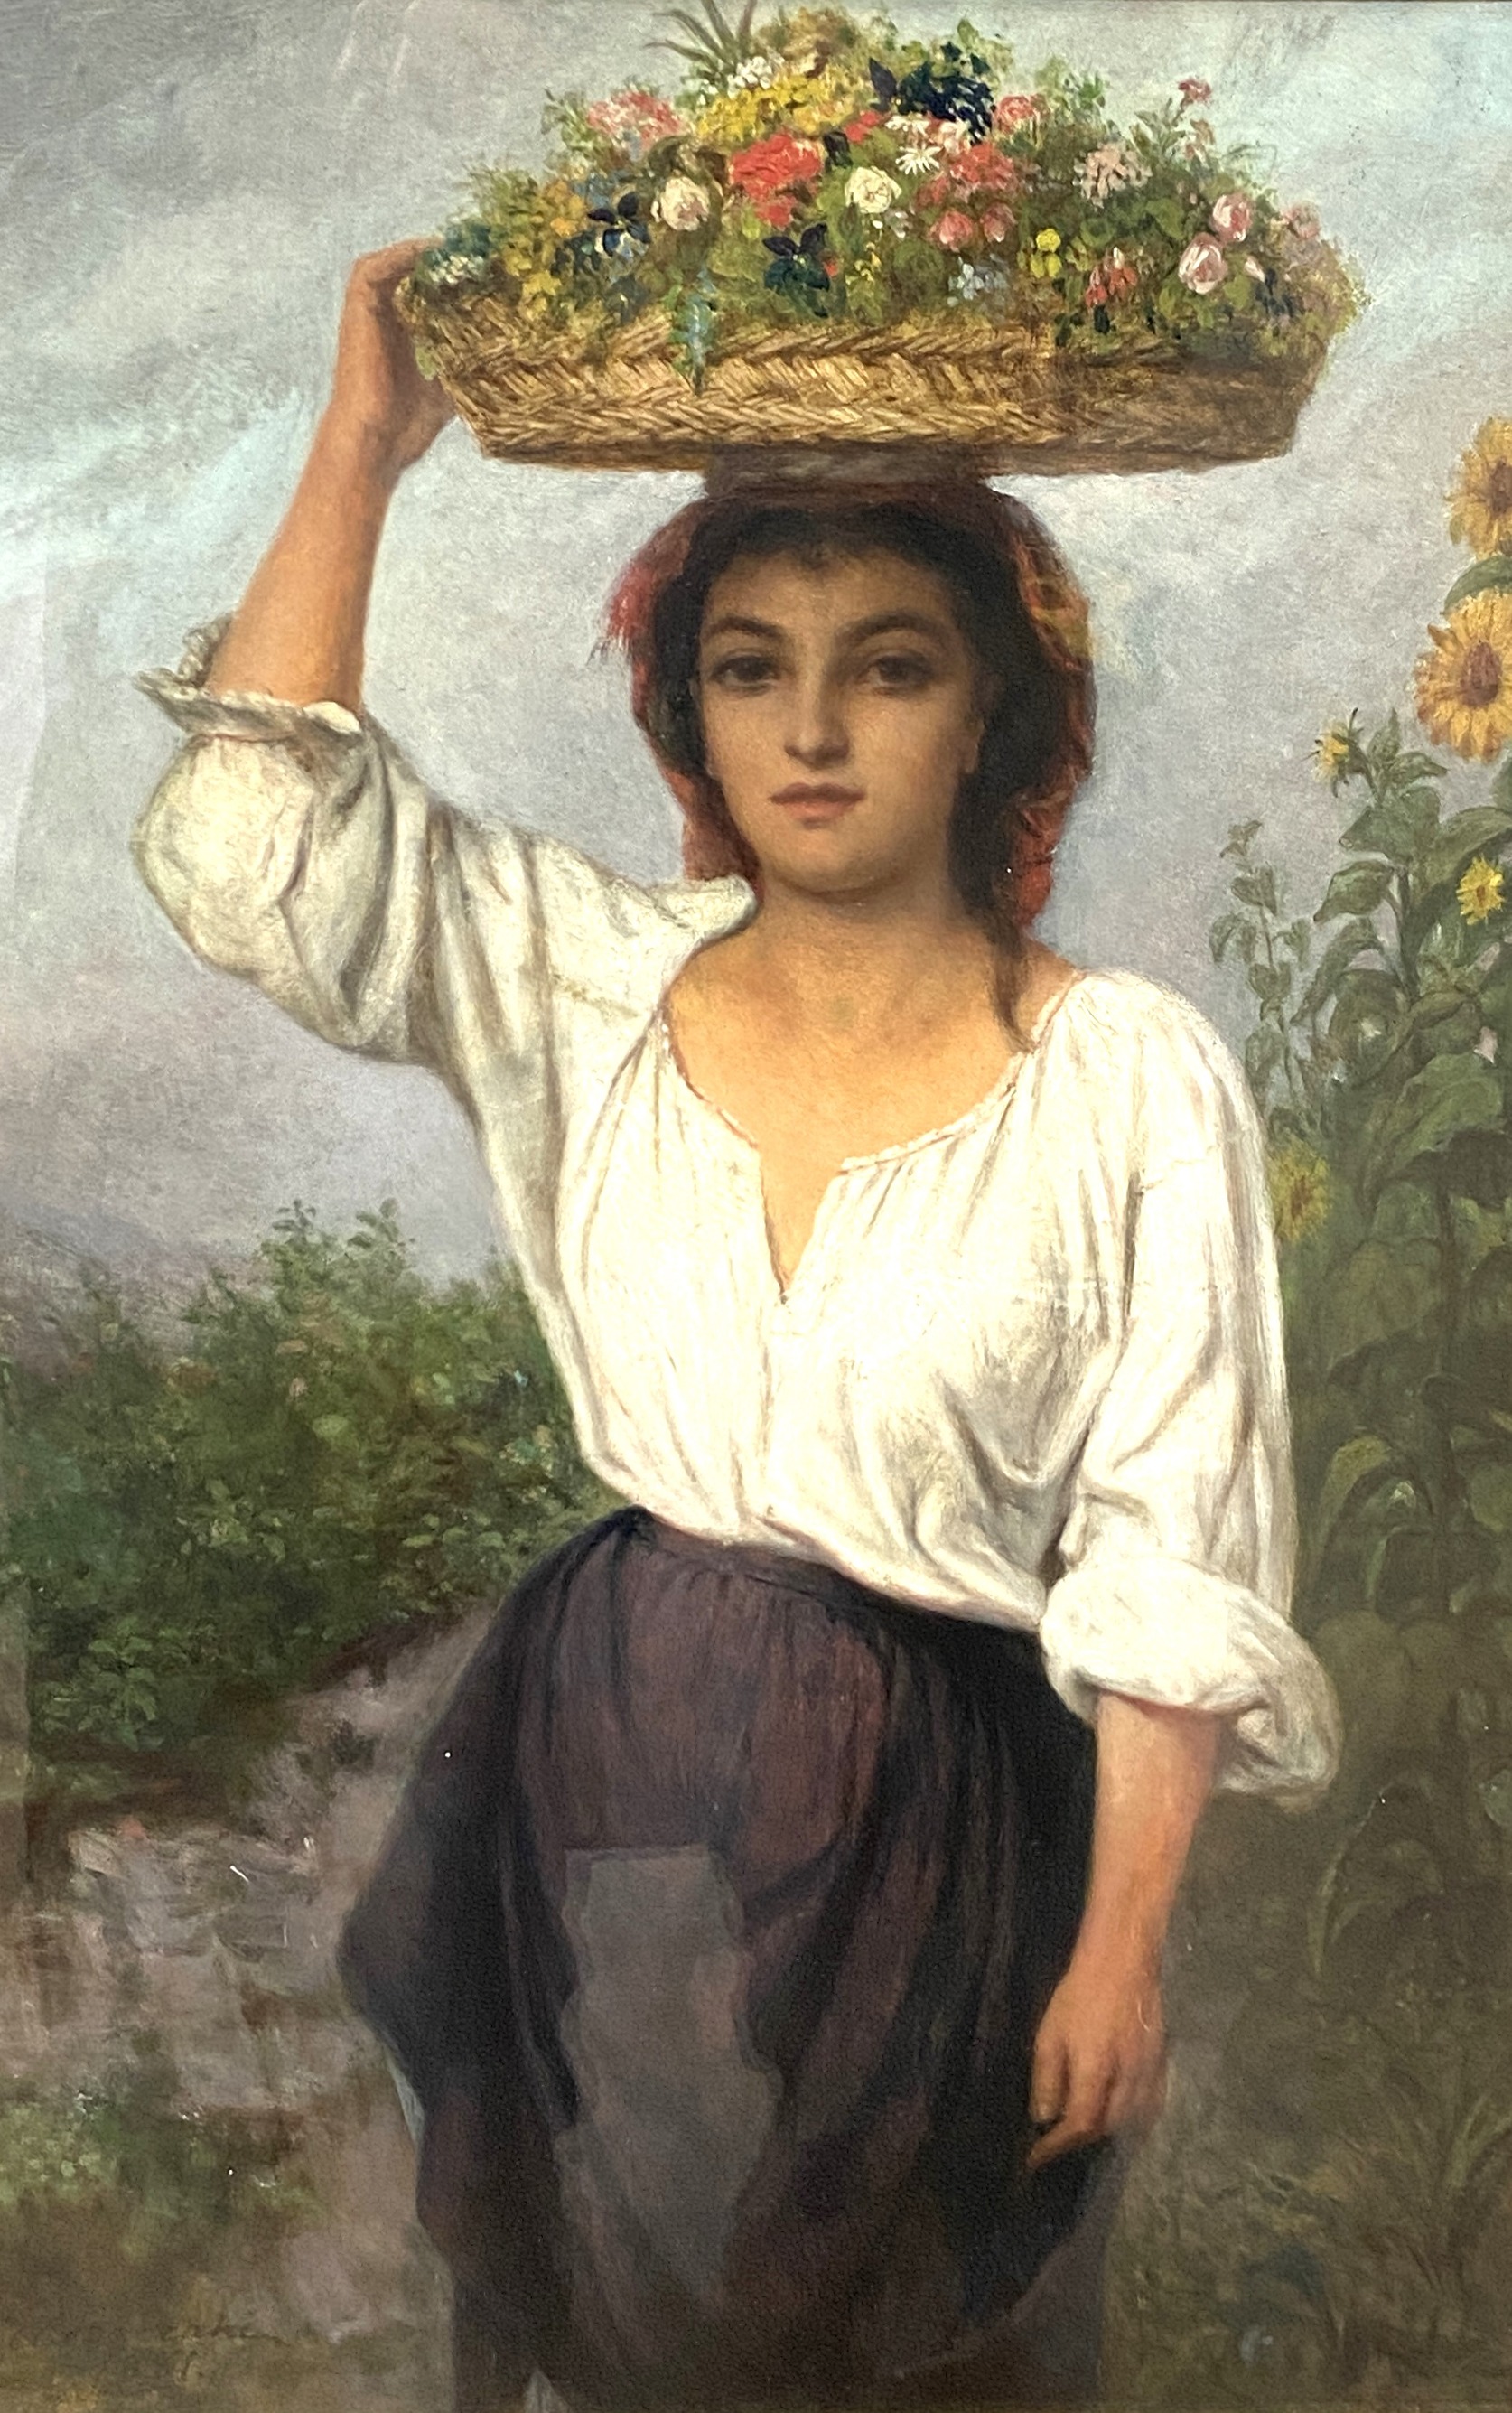 ATTILIO BACCANI, Italian (act.1844-1889), The Flower Seller,  oil on panel, signed and dated lower